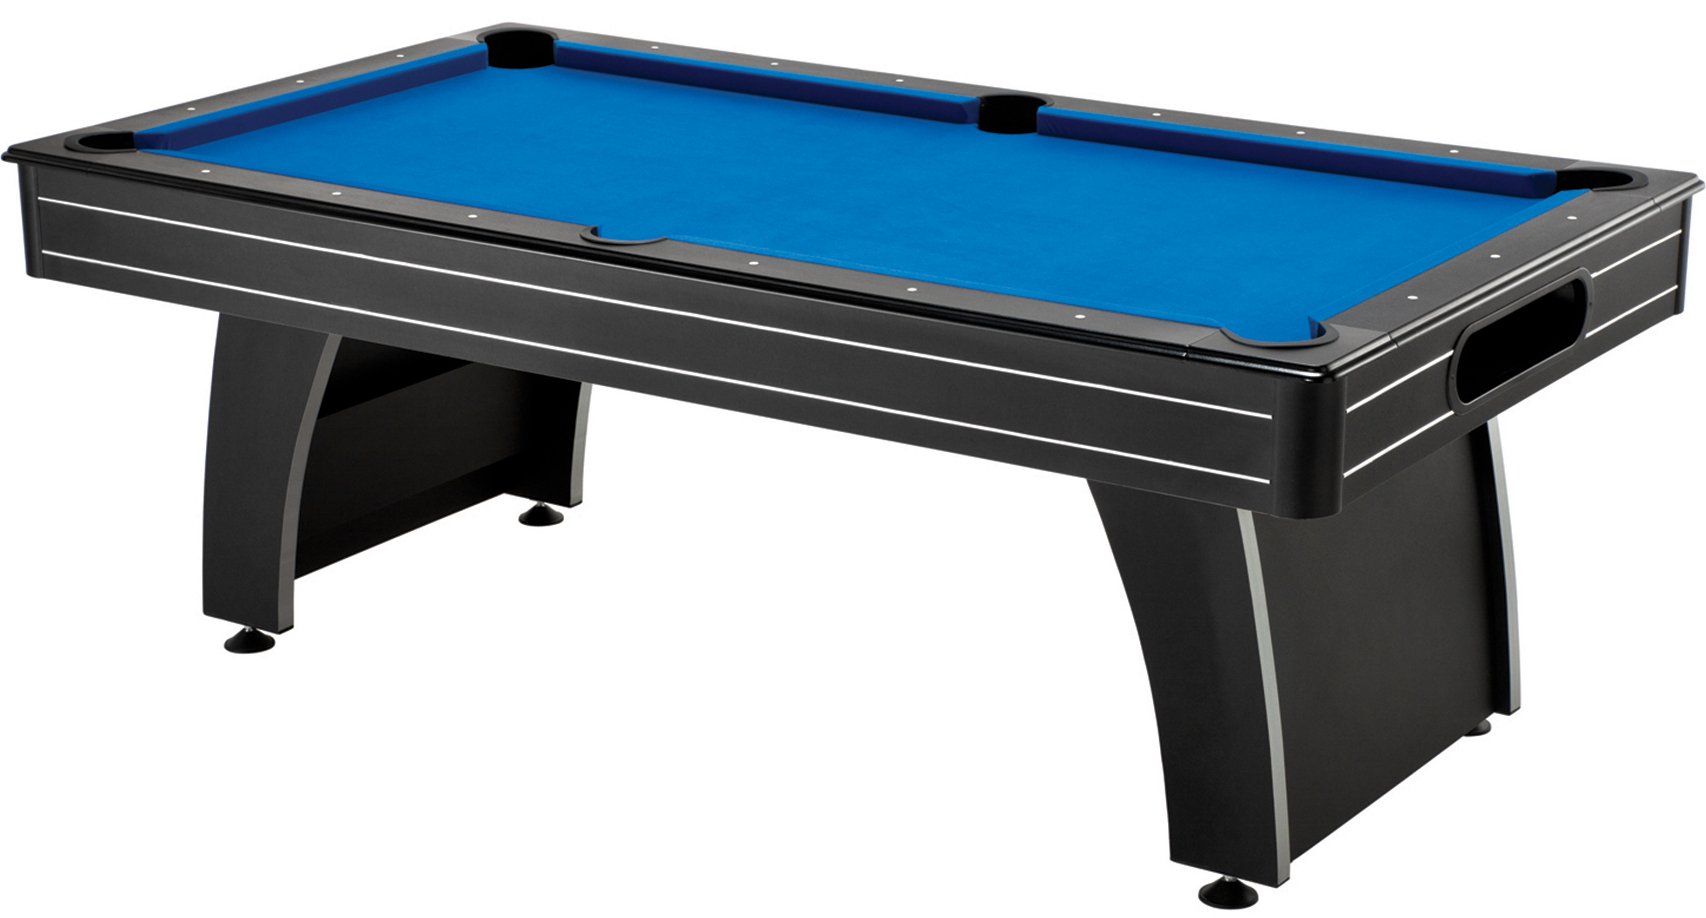 Fat Cat by GLD PRODUCTS Tucson 7’ Pool Table with Automatic Ball Return, Electric Blue Playing Surface & Included Billiard Accessories to Play Out of The Boxington 9 ft. Allendale Collection Shuffleboard Table